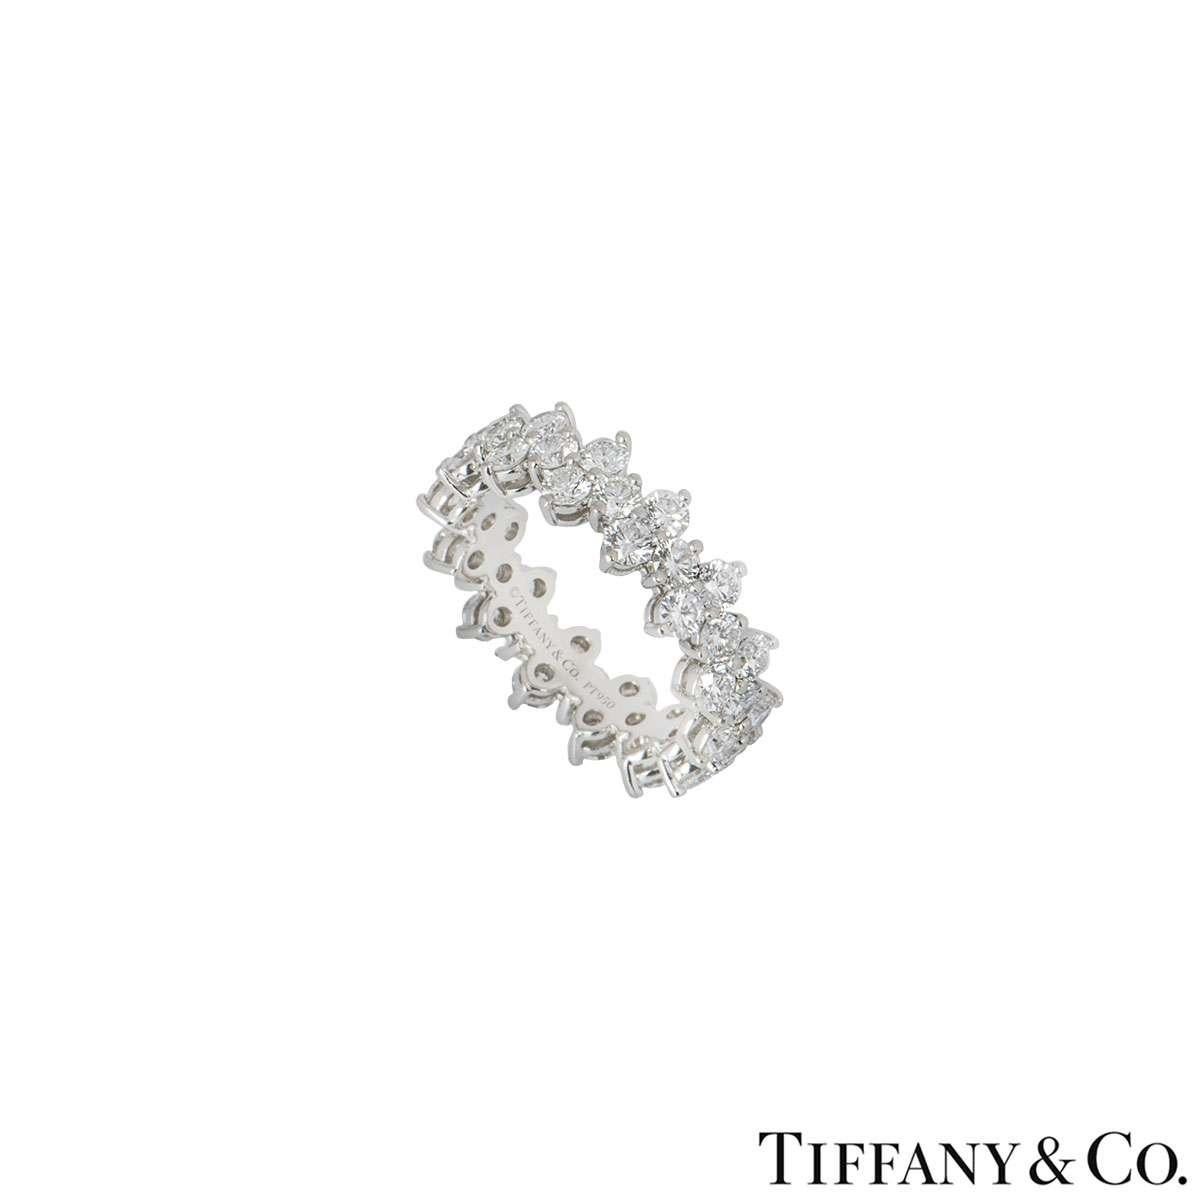 A stunning diamond eternity ring in platinum from the Aria collection by Tiffany & Co. The ring is composed of 42 round brilliant cut diamonds, alternating from a single round brilliant cut diamond to double set round brilliant cut diamonds. The